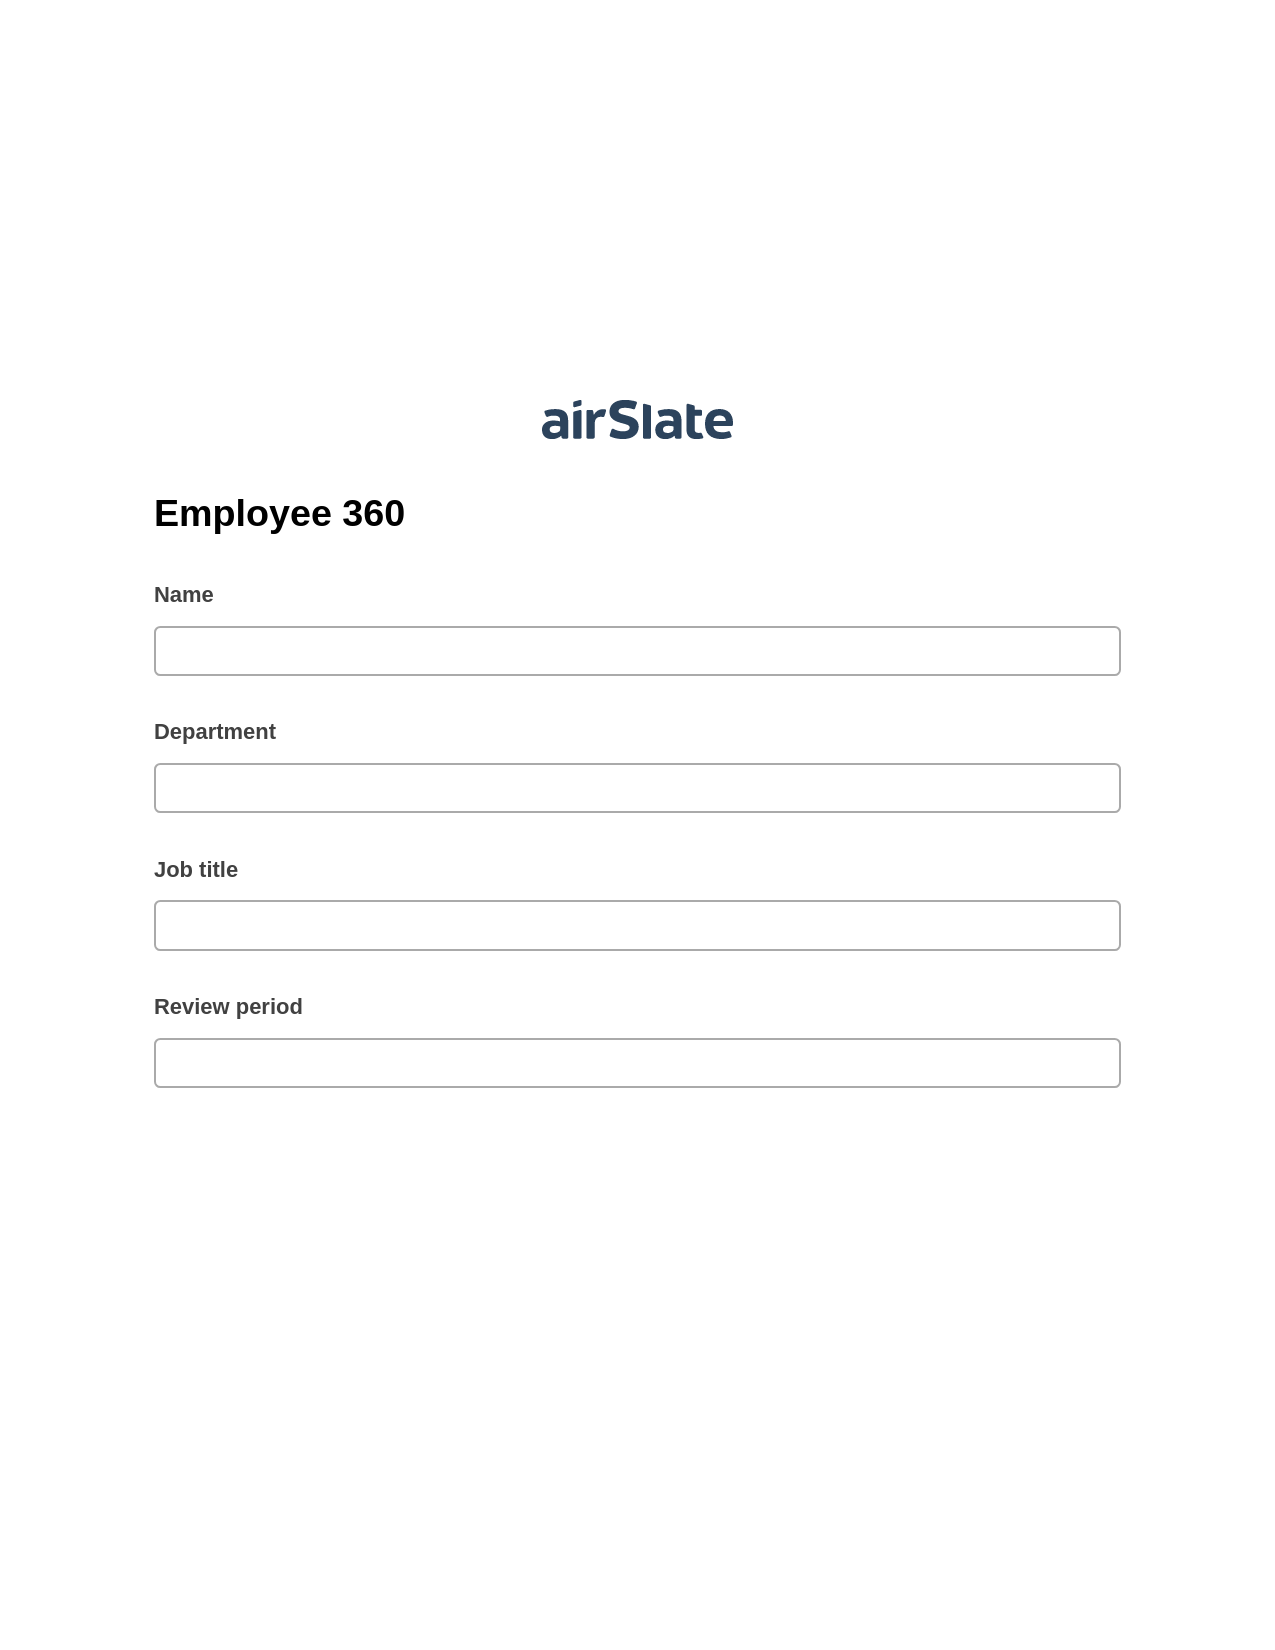 Employee 360 Pre-fill Document Bot, Update MS Dynamics 365 Record Bot, Export to Excel 365 Bot